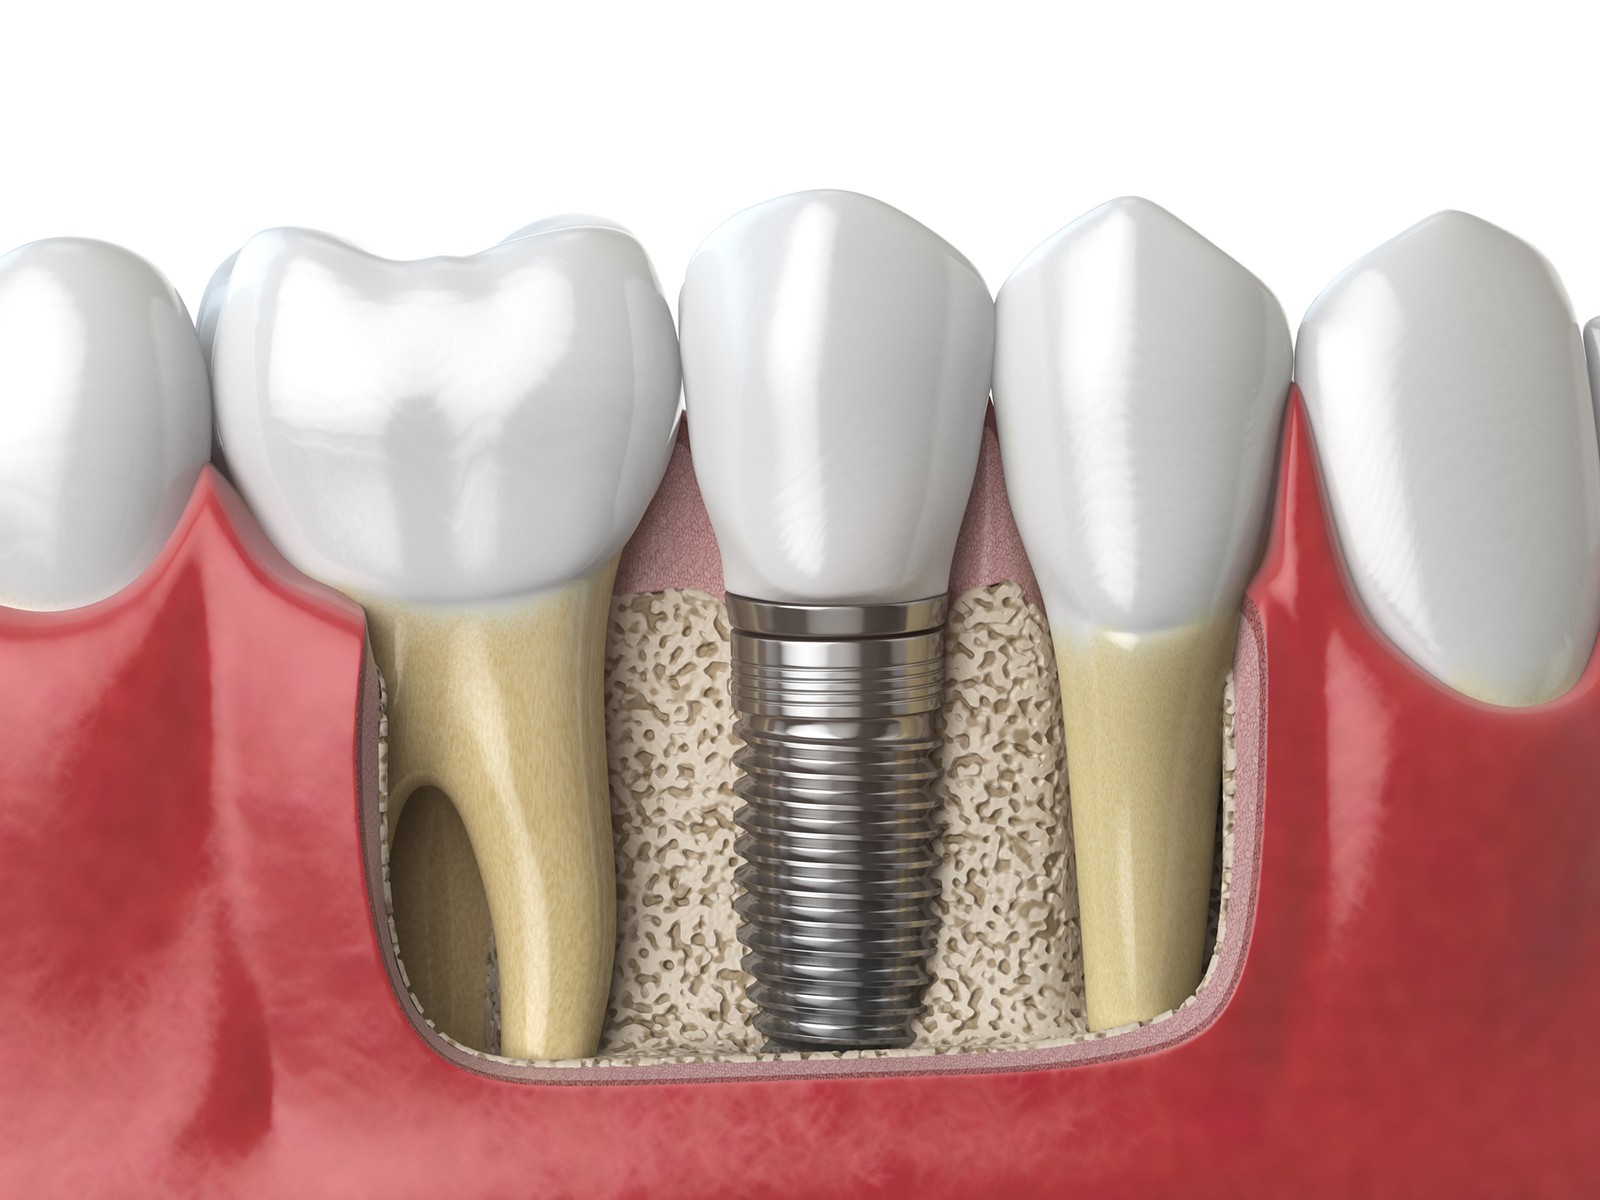 Is Alcohol Bad for Dental Implants?